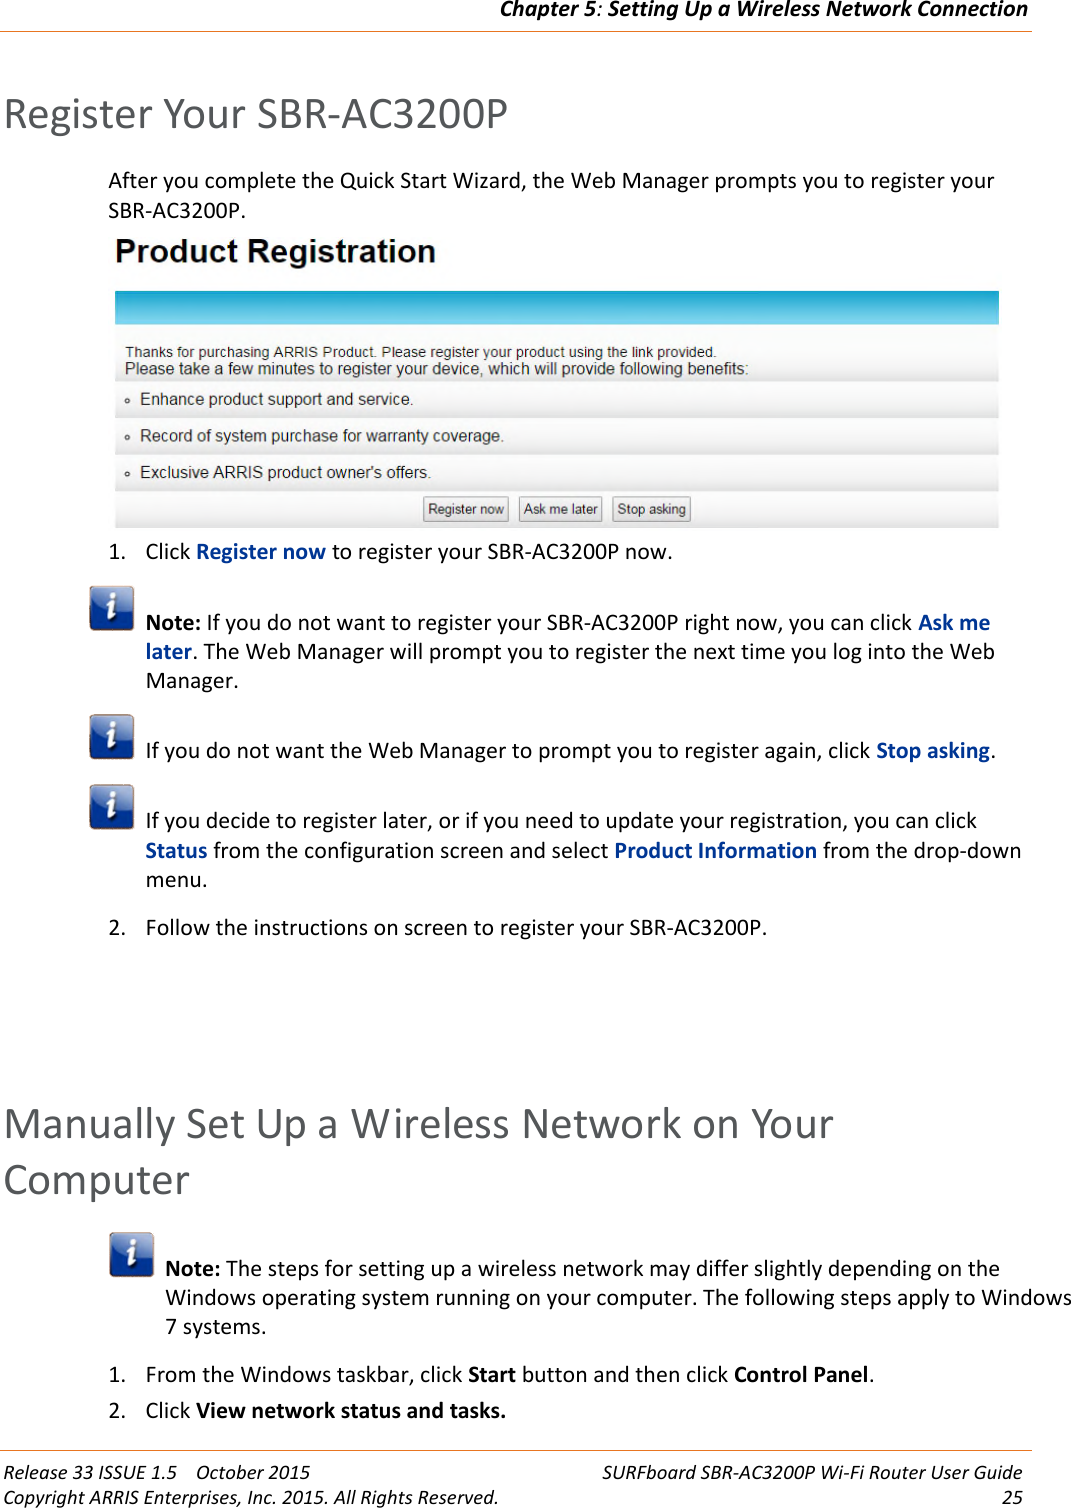 Chapter 5:Setting Up a Wireless Network ConnectionRelease 33 ISSUE 1.5 October 2015 SURFboard SBR-AC3200P Wi-Fi Router User GuideCopyright ARRIS Enterprises, Inc. 2015. All Rights Reserved. 25Register Your SBR-AC3200PAfter you complete the Quick Start Wizard, the Web Manager prompts you to register yourSBR-AC3200P.1. Click Register now to register your SBR-AC3200P now.Note: If you do not want to register your SBR-AC3200P right now, you can click Ask melater. The Web Manager will prompt you to register the next time you log into the WebManager.If you do not want the Web Manager to prompt you to register again, click Stop asking.If you decide to register later, or if you need to update your registration, you can clickStatus from the configuration screen and select Product Information from the drop-downmenu.2. Follow the instructions on screen to register your SBR-AC3200P.Manually Set Up a Wireless Network on YourComputerNote: The steps for setting up a wireless network may differ slightly depending on theWindows operating system running on your computer. The following steps apply to Windows7 systems.1. From the Windows taskbar, click Start button and then click Control Panel.2. Click View network status and tasks.